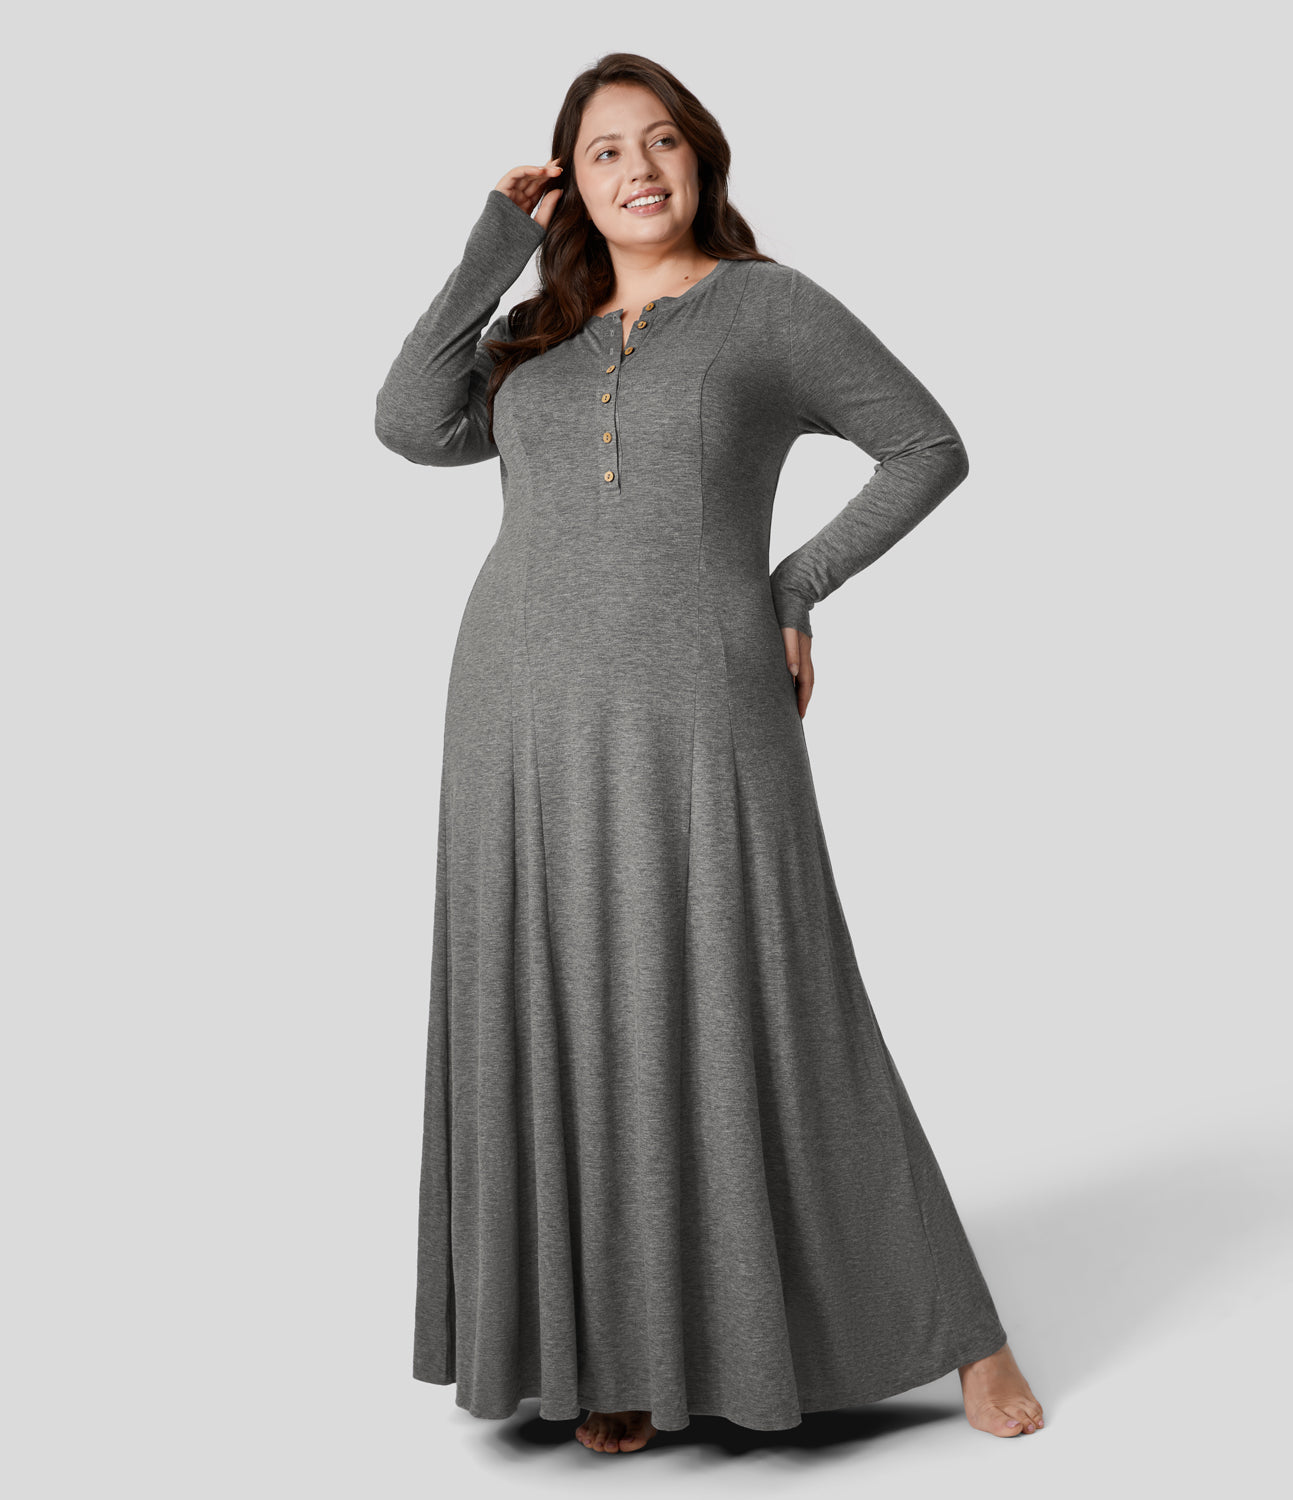 

Halara Round Neck Button Long Sleeve Flare Maxi Casual Plus Size Dress Plus Size Dress - Light Green Floral Yarn